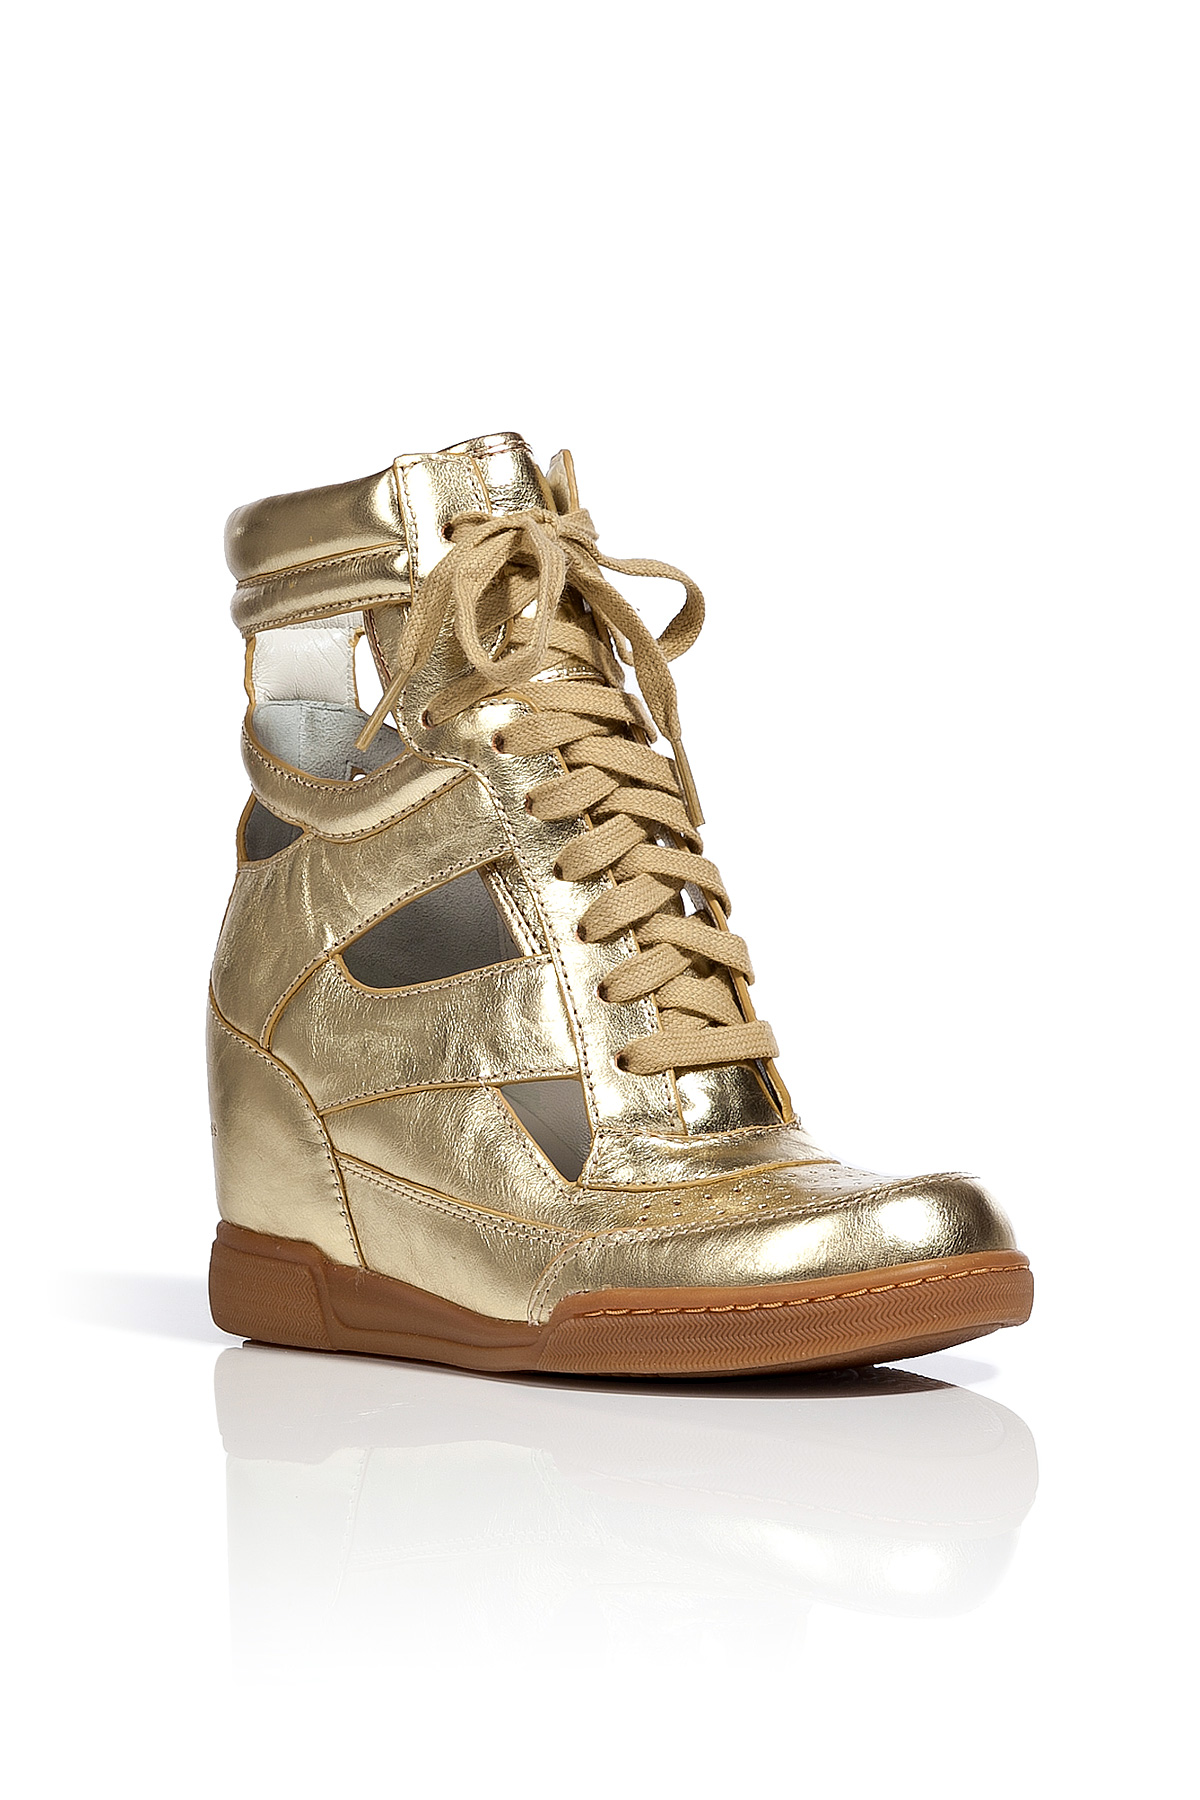 Lyst - Marc by marc jacobs Goldtoned Cutout Wedge Sneakers in Metallic